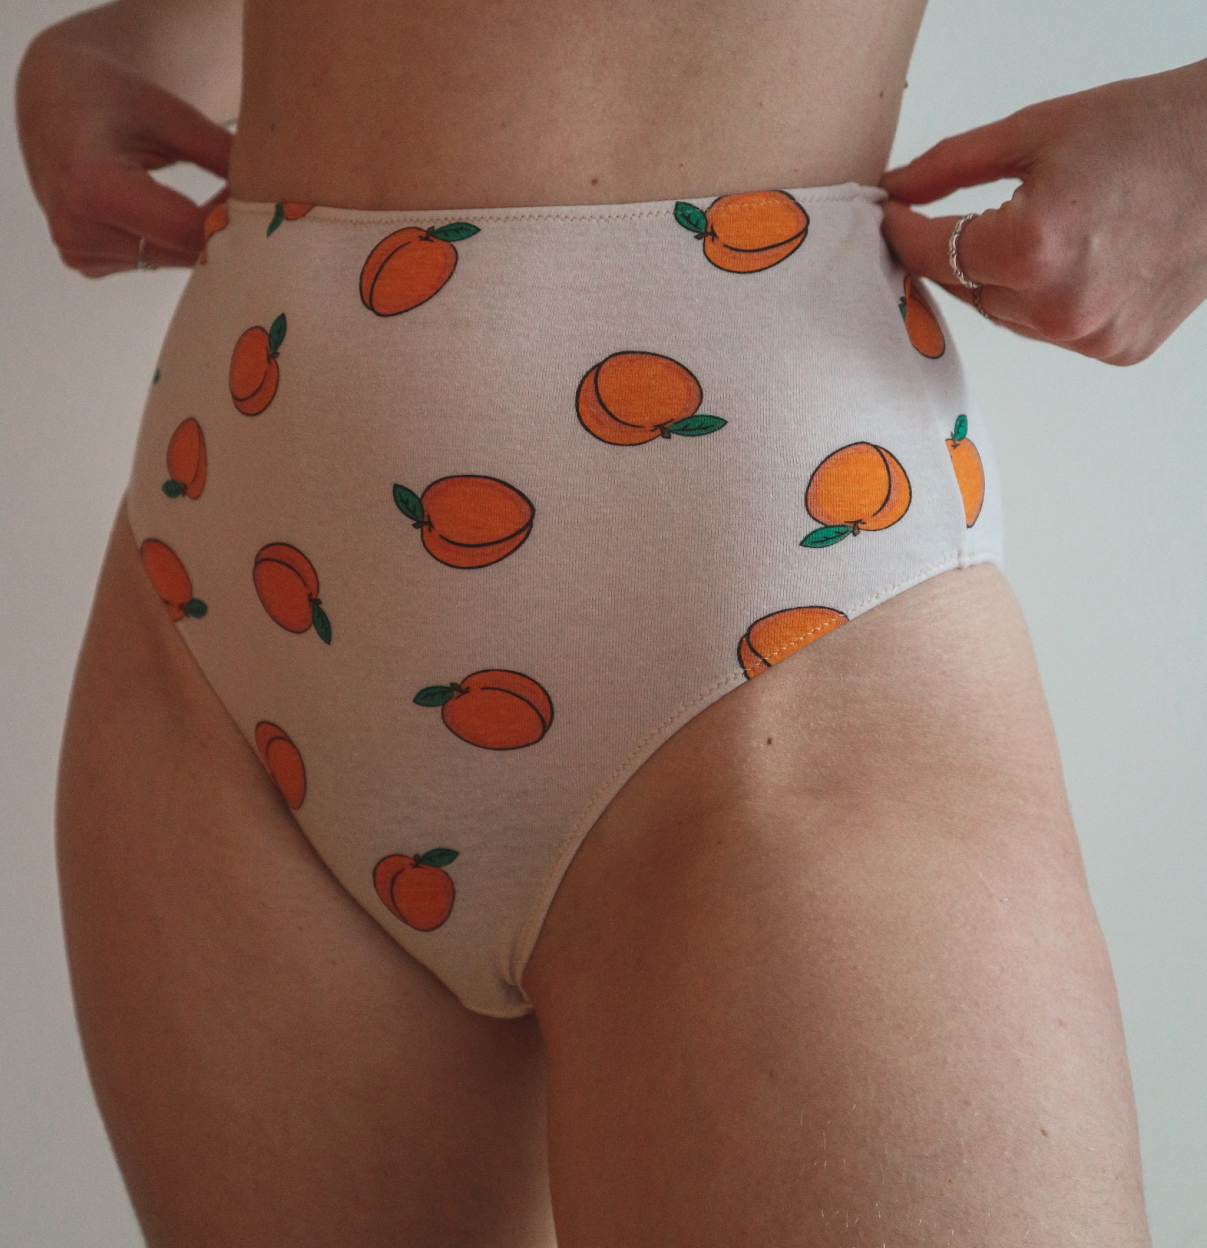 Sewing Your Own Underwear is Empowering